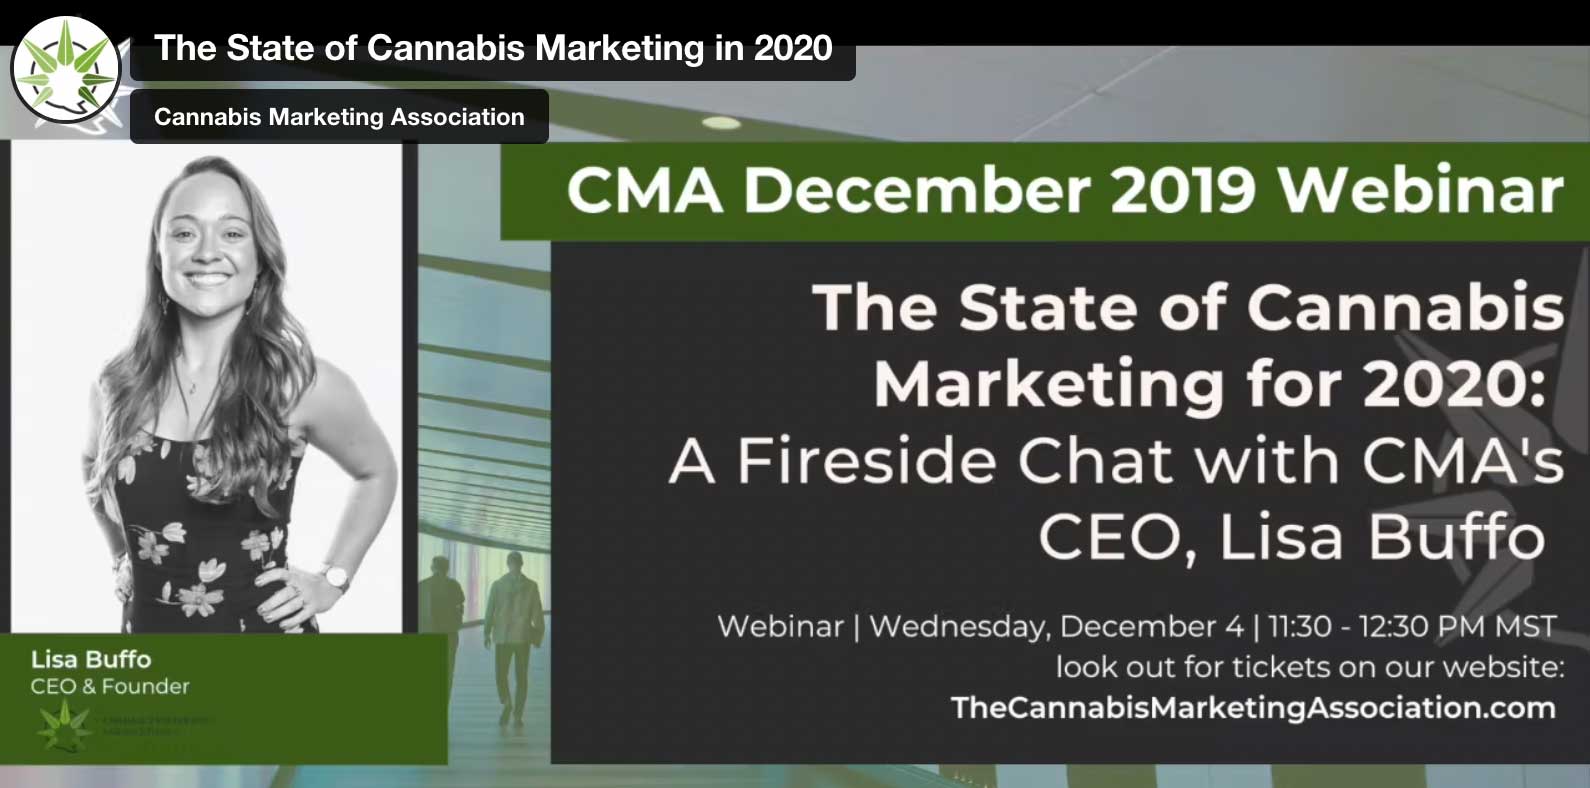 CMA: The State of Cannabis Marketing in 2020